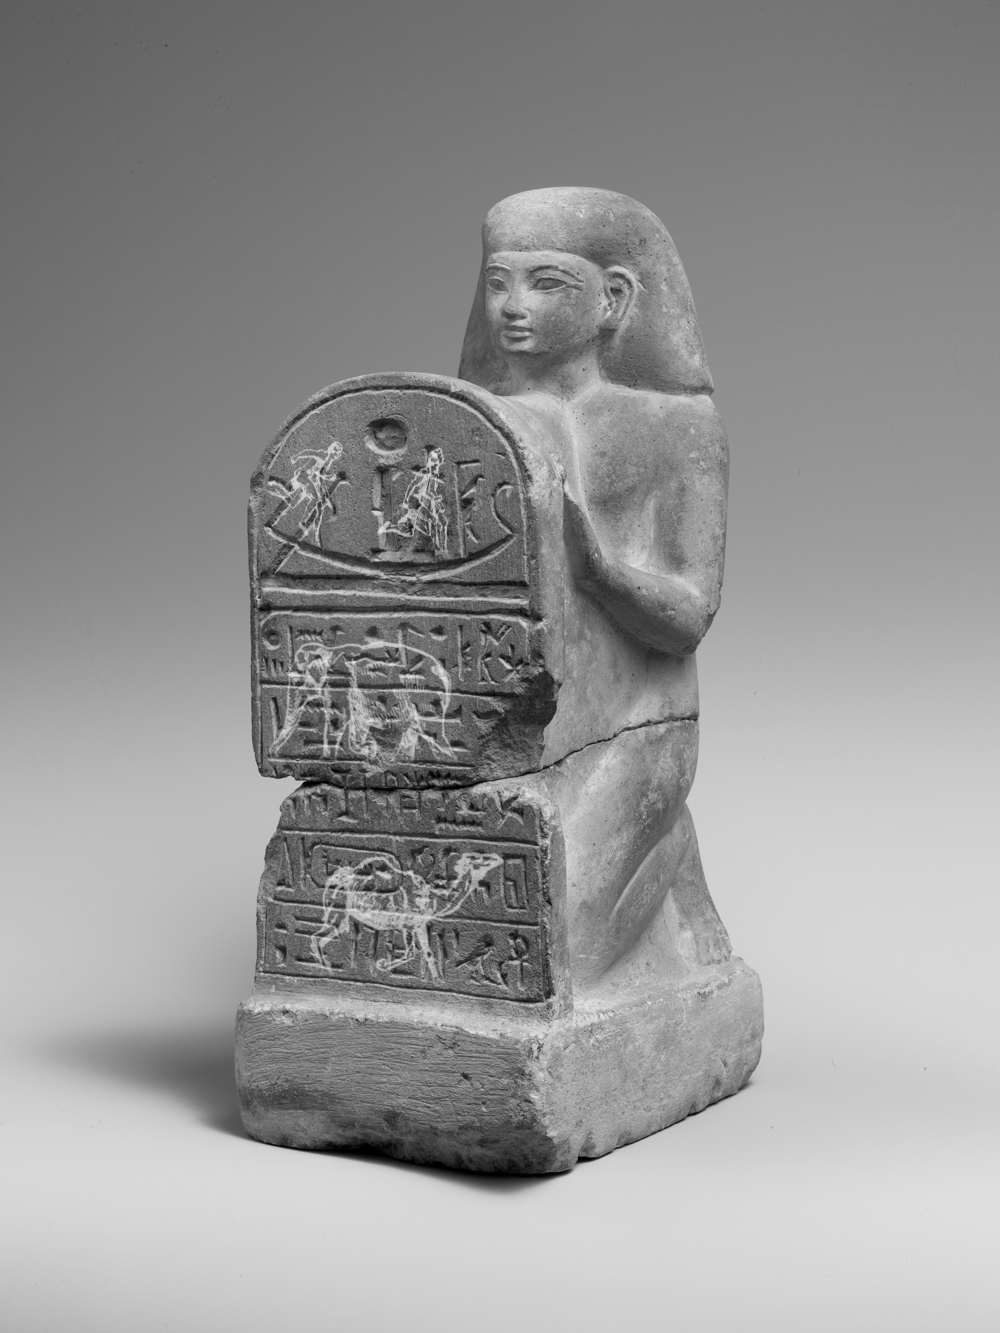 billdomonkos:
“ GIF: Bill Domonkos, 2019
Image: Stelophorous Statue of Bay, ca. 1294–1250 B.C. This statuette depicts a kneeling man holding a stela inscribed with a hymn to the sun.
”
GIF Artist: Bill Domonkos